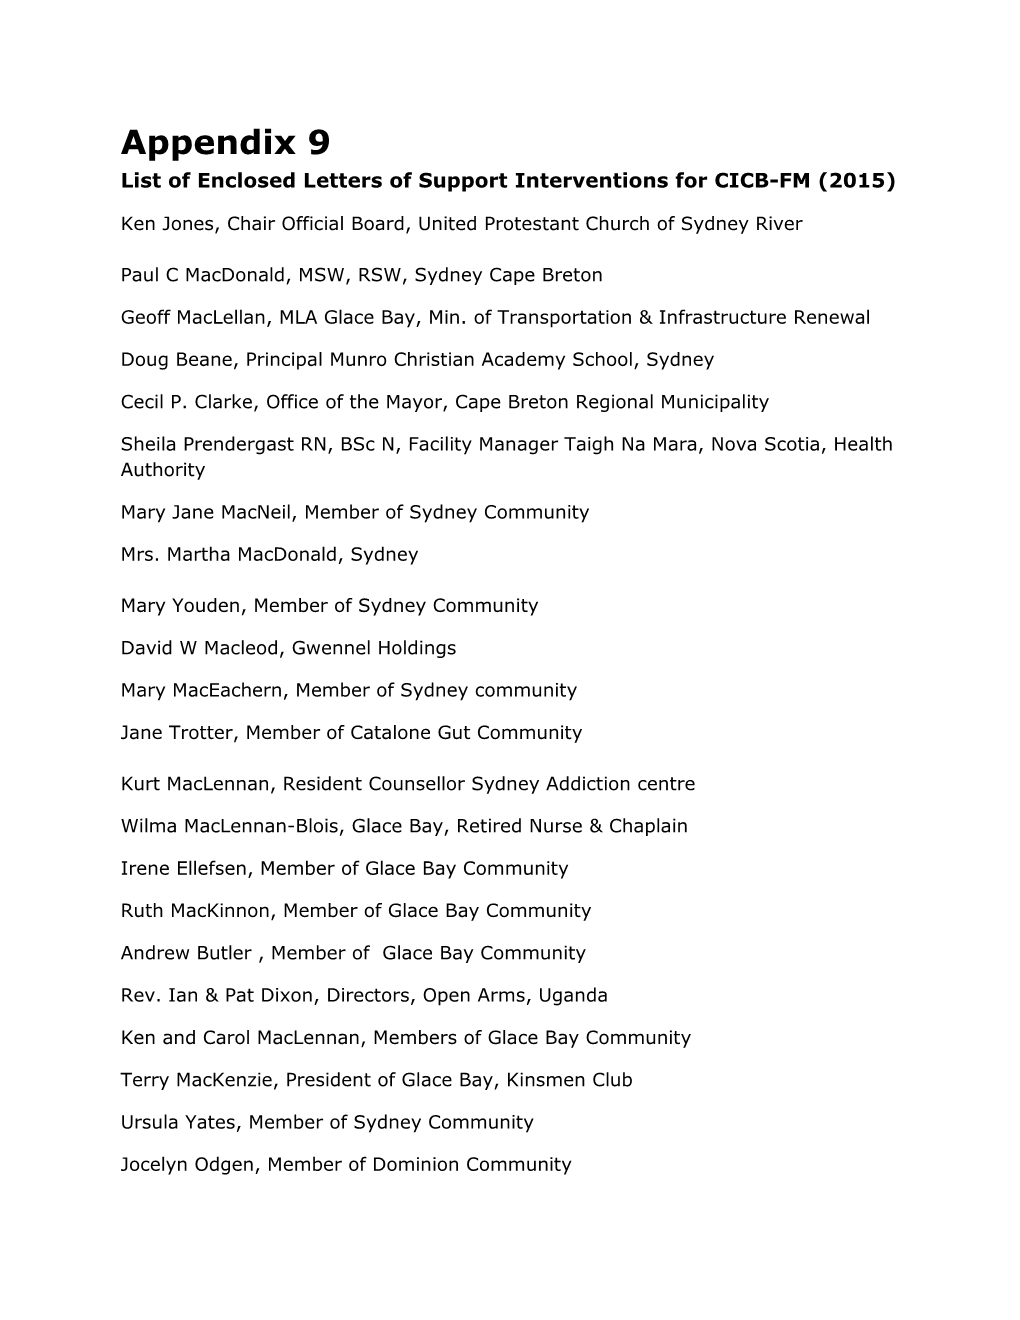 Appendix 9 List of Intervention Letters of Support.Pdf